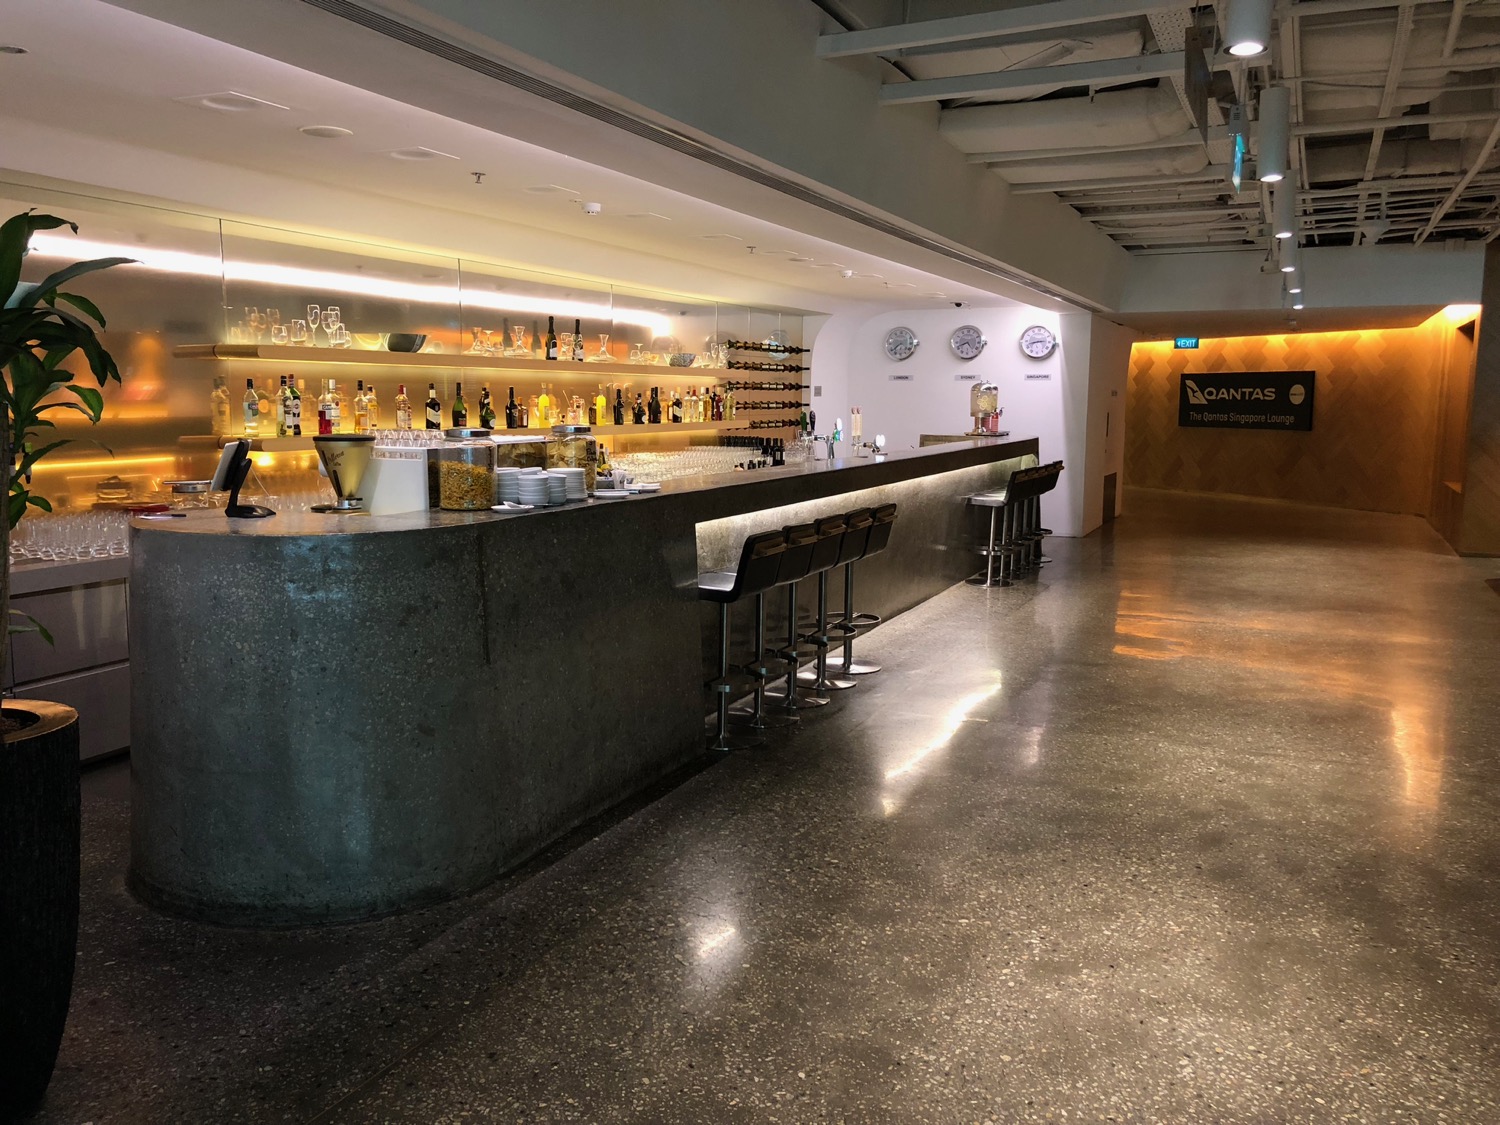 Review: Qantas Lounge Singapore (SIN) - Live and Let's Fly